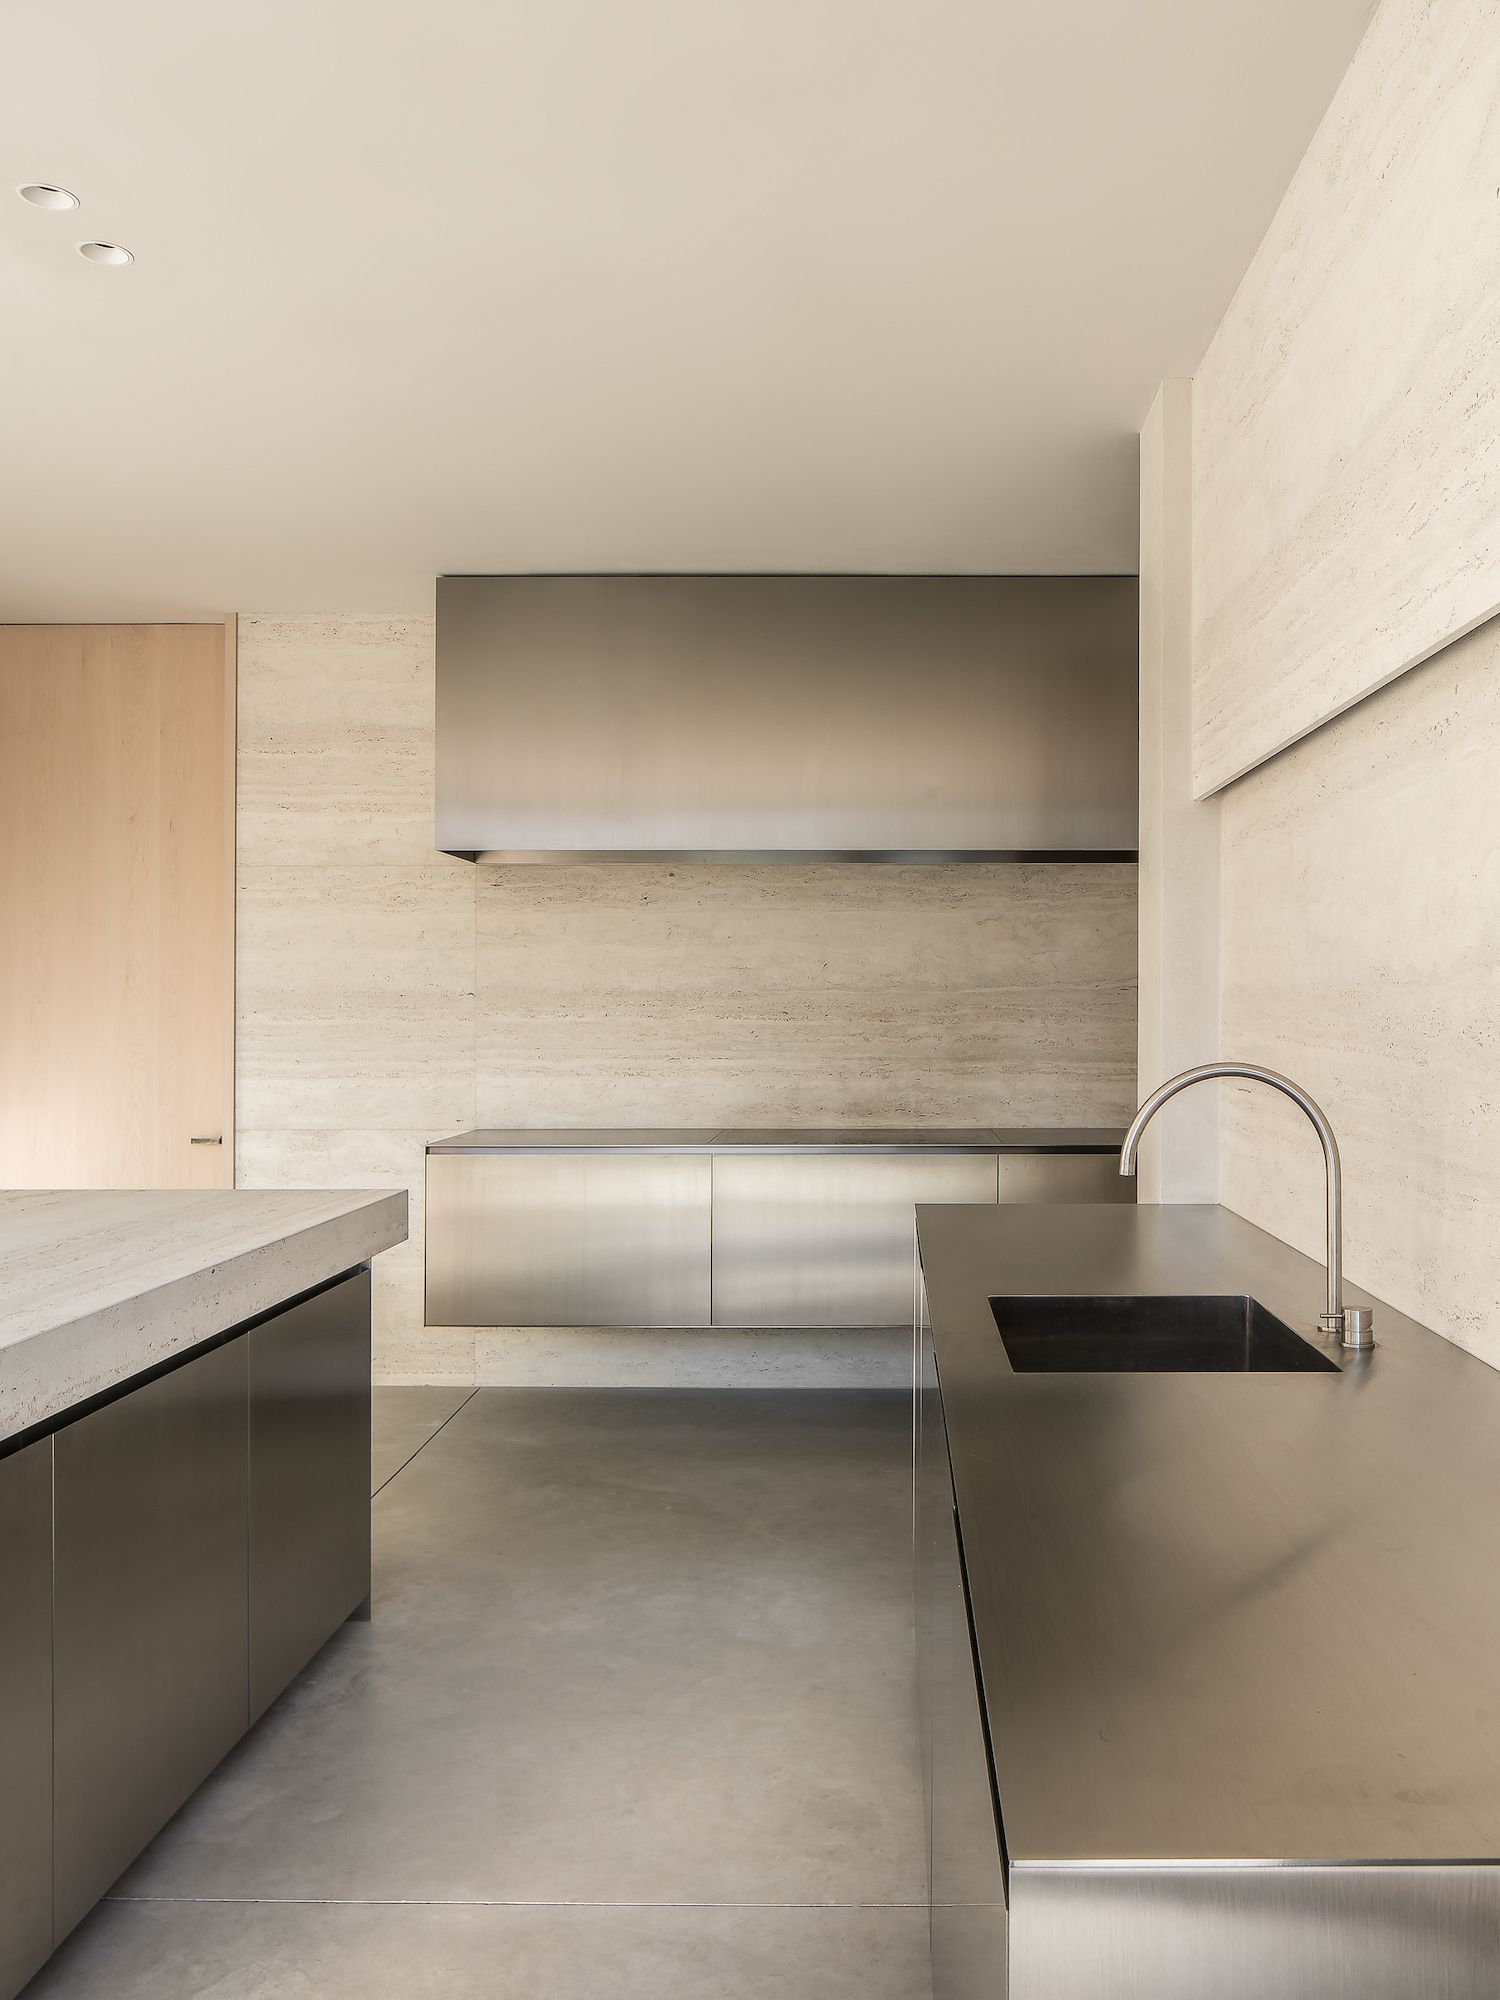 The Versatility of Stainless Steel Kitchens